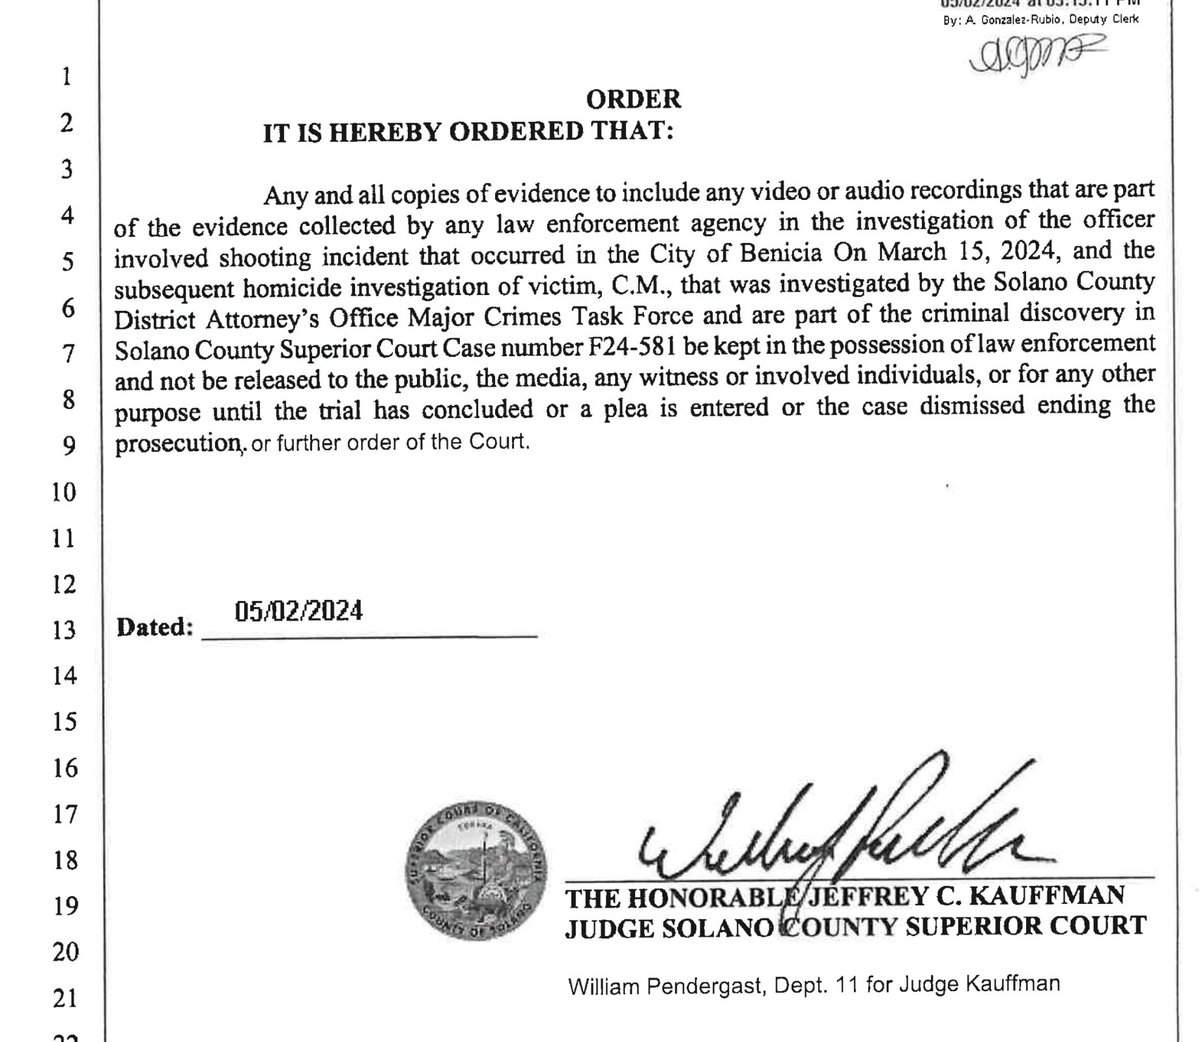 A new obstructive tactic by the Solano County DA's office and the courts in police shootings is that if the police shoot someone who survives and is charged with a crime, body camera video is hidden from the public because the DA will ask the judge for a restraining order.